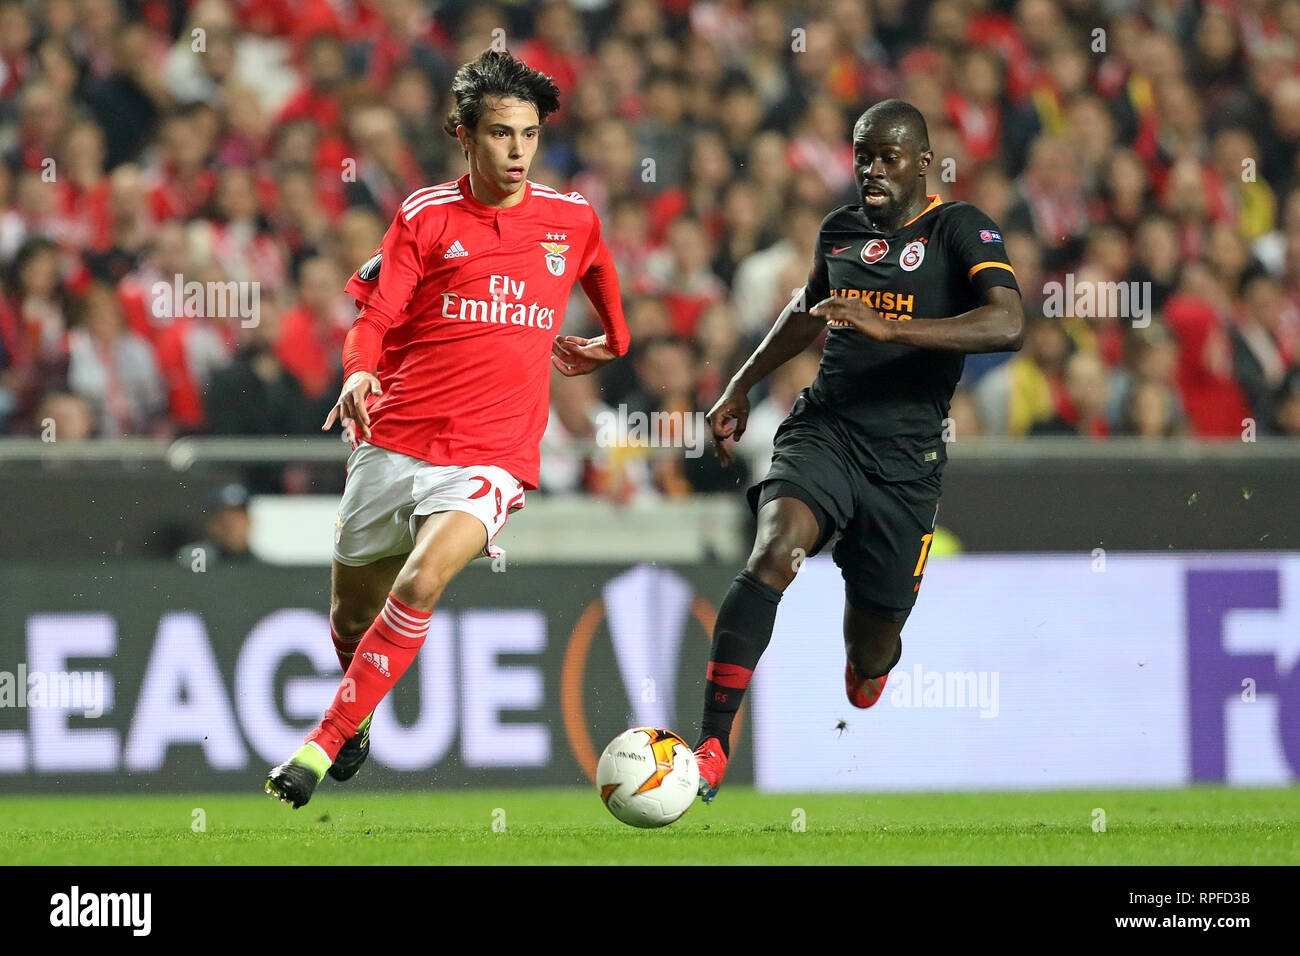 João Félix of SL Benfica (L) vies for the ball with Badou Ndiaye of Galatasaray AS (R) during the Europa League 2018/2019 footballl match between SL Benfica vs Galatasaray AS.  (Final score: SL Benfica 0 - 0 Galatasaray AS) Stock Photo